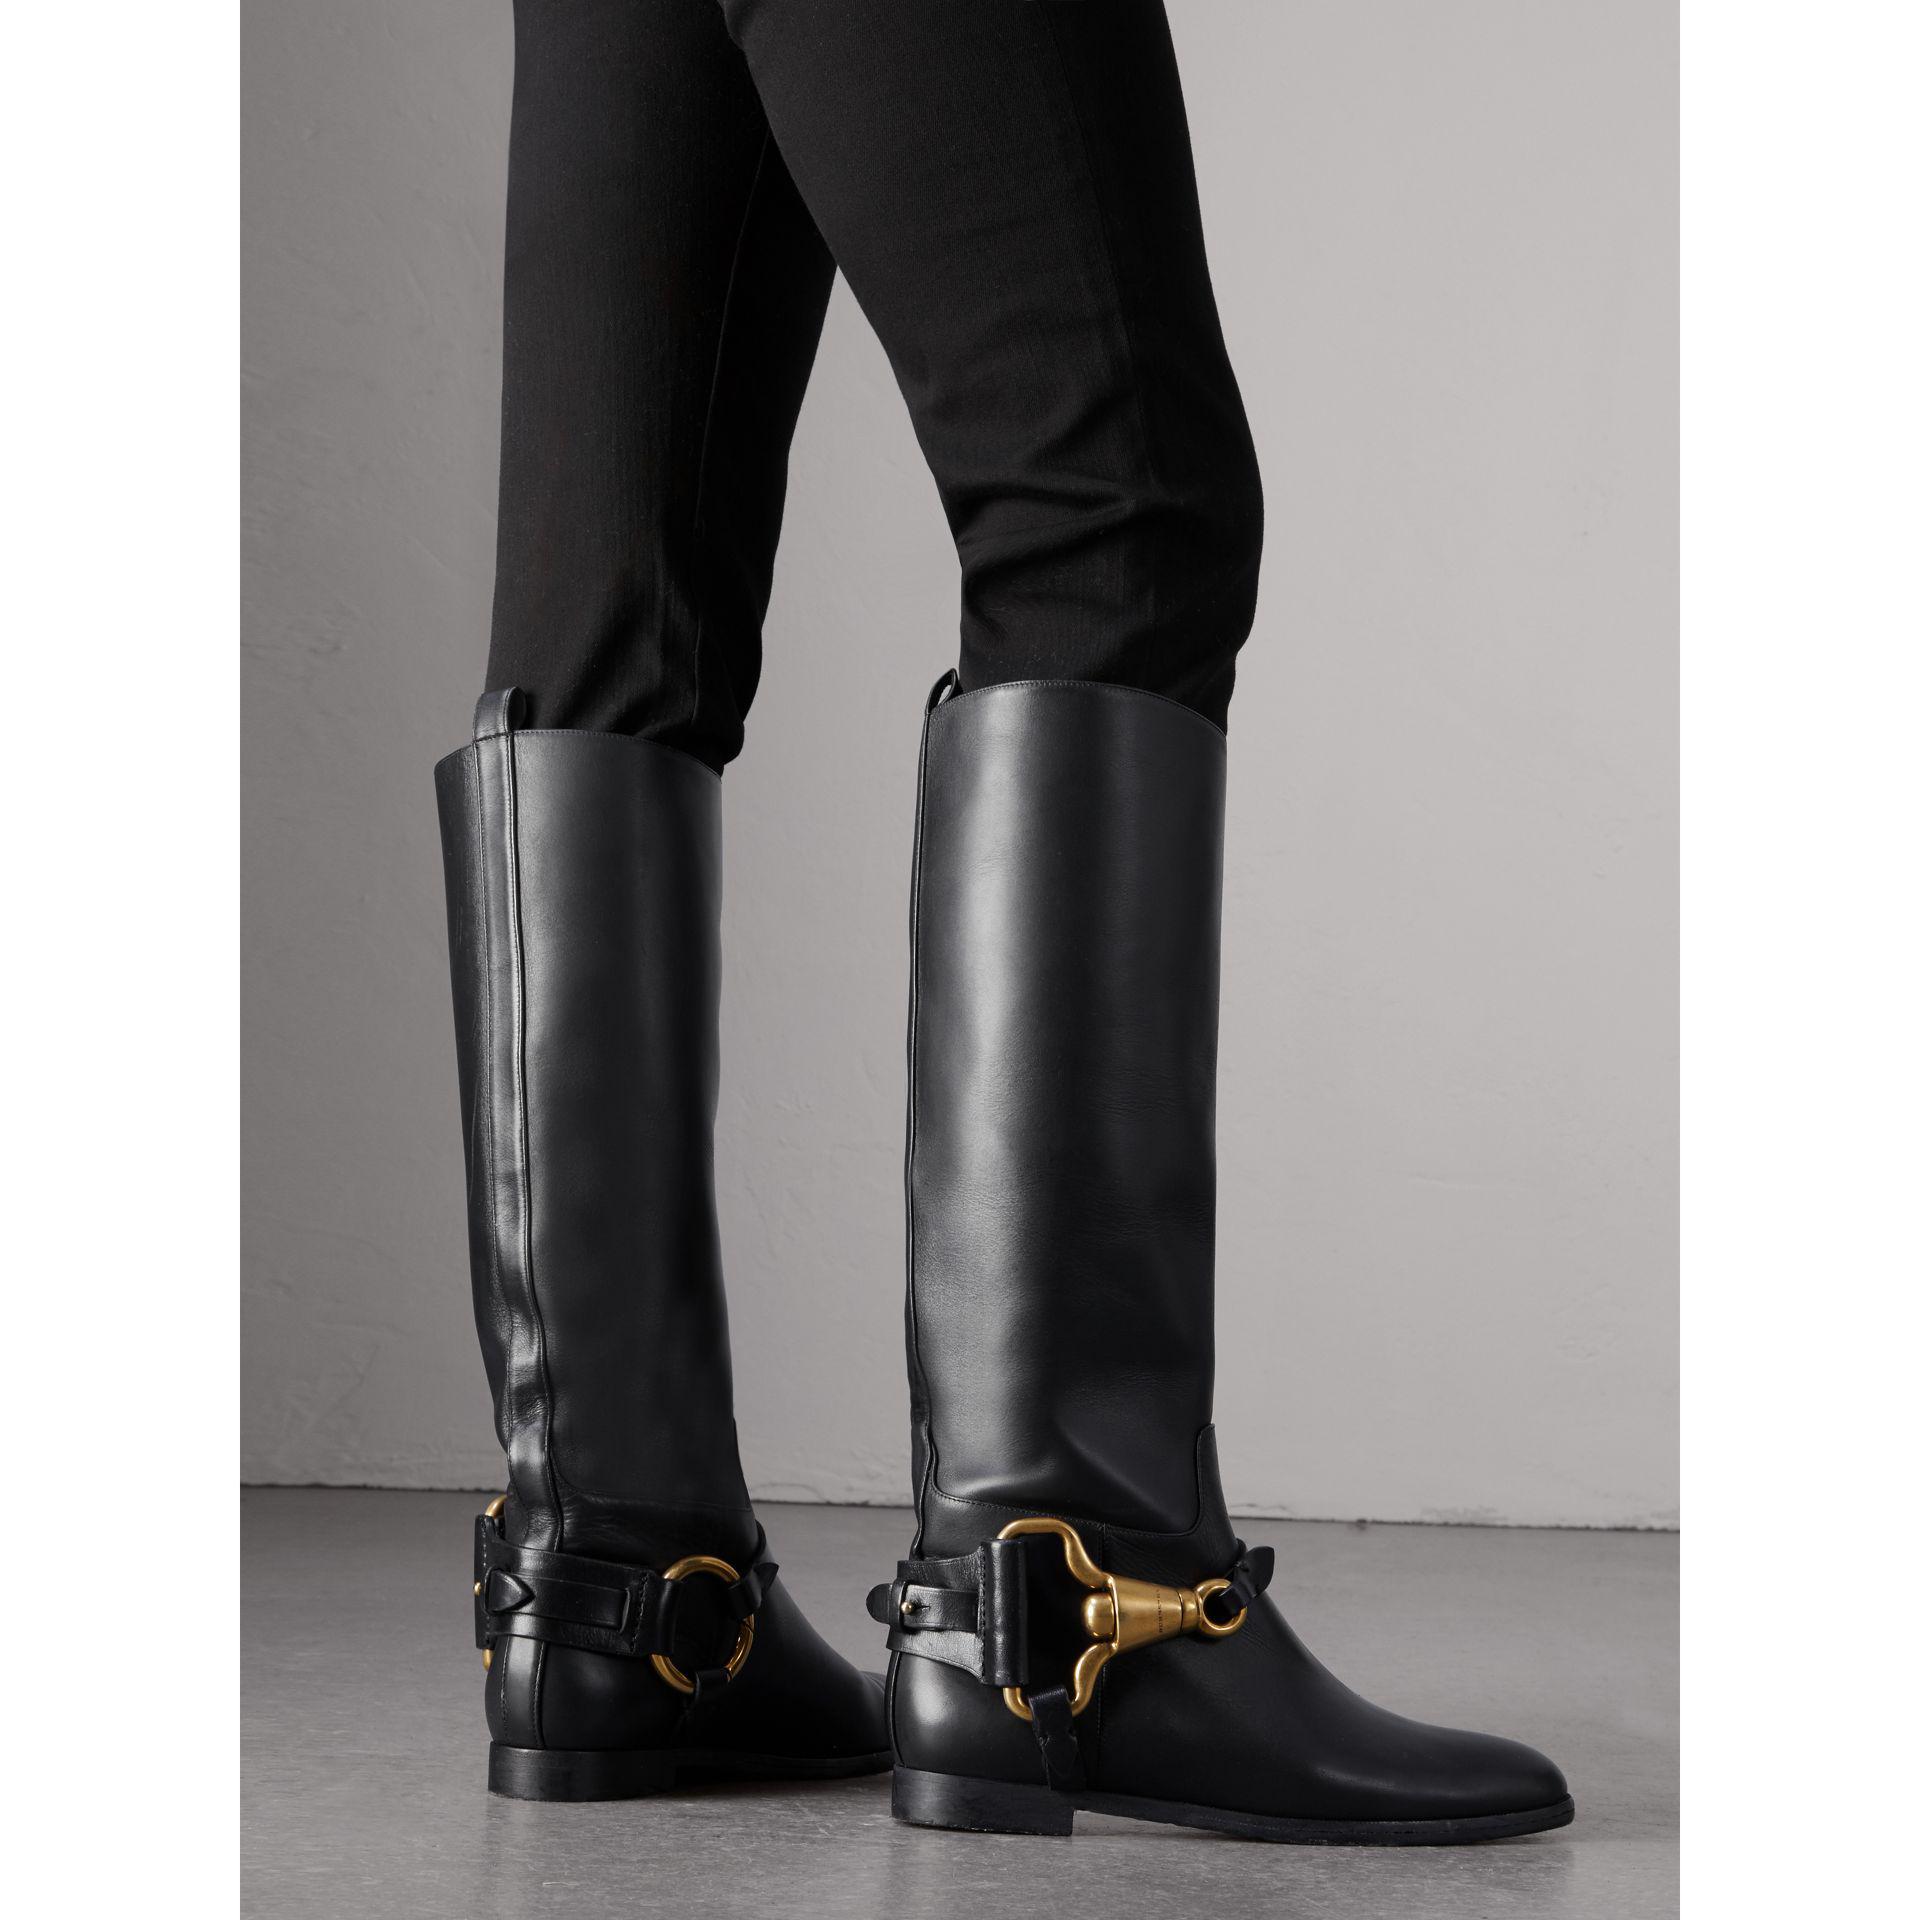 Burberry Equestrian Detail Leather Riding Boots in Black